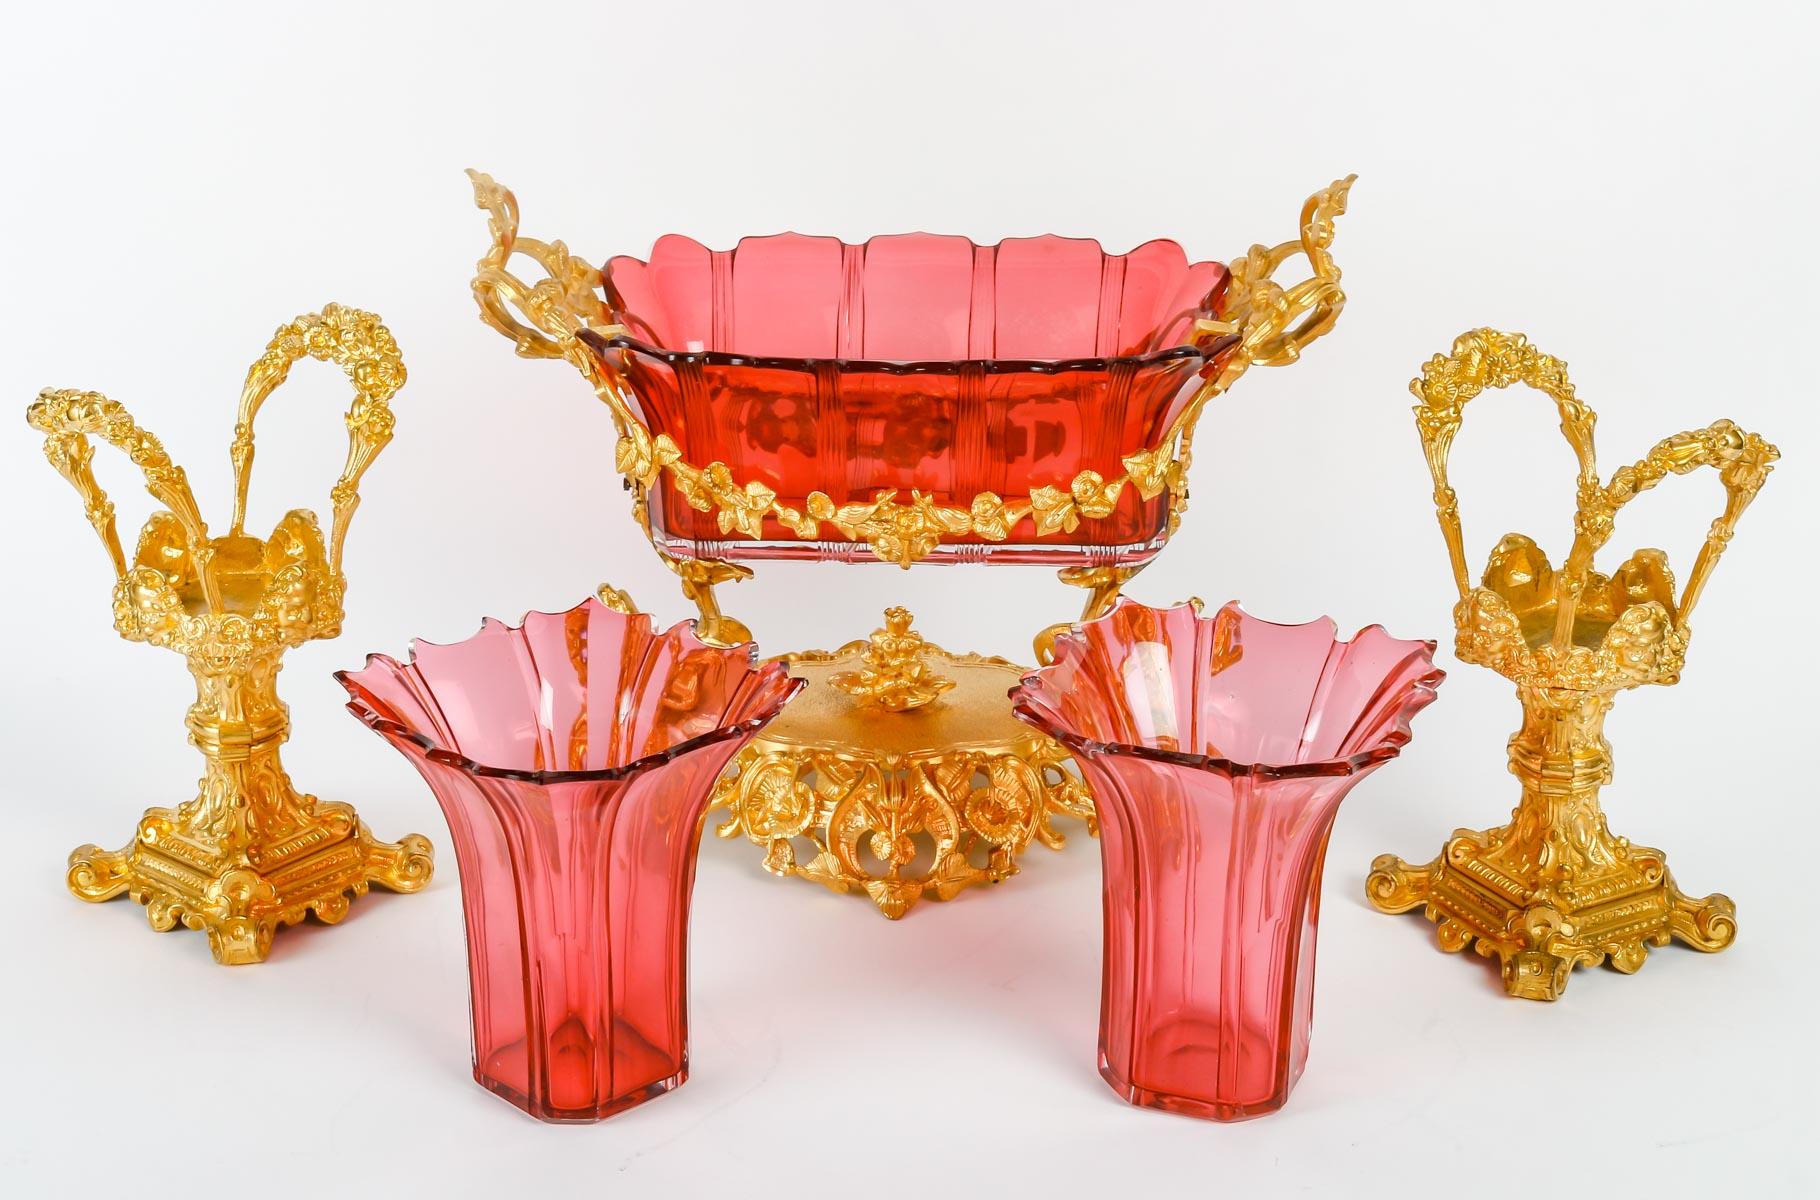 French Napoleon III Crystal Set Consisting of a Bowl and Two Cornet Vases.